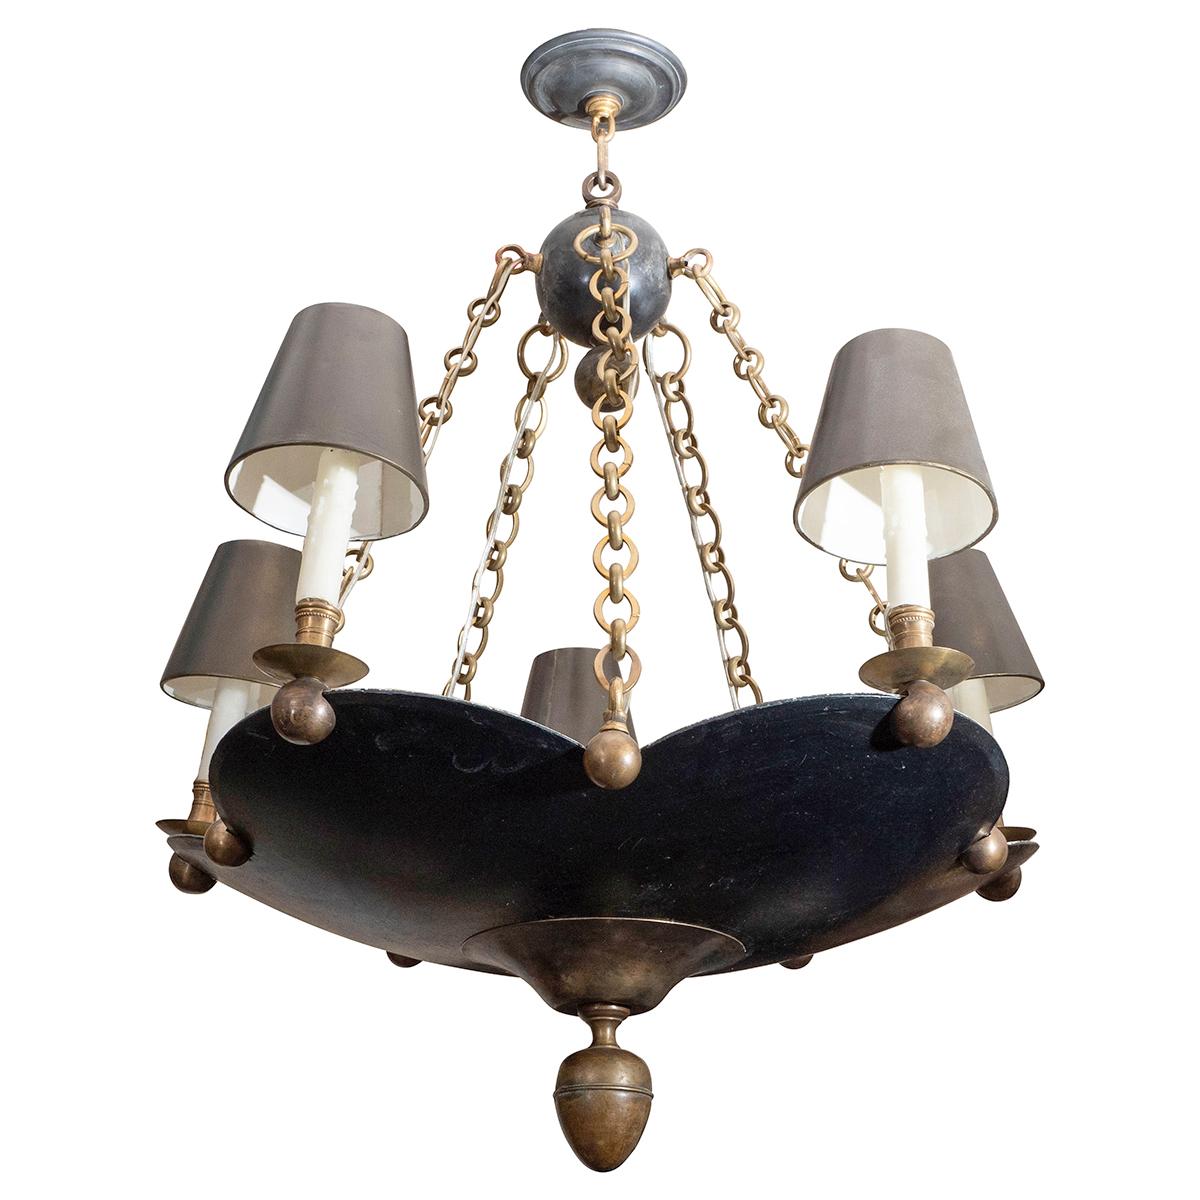 Rare hammered iron and brass flower-shaped chandelier with original conical enameled metal shades.